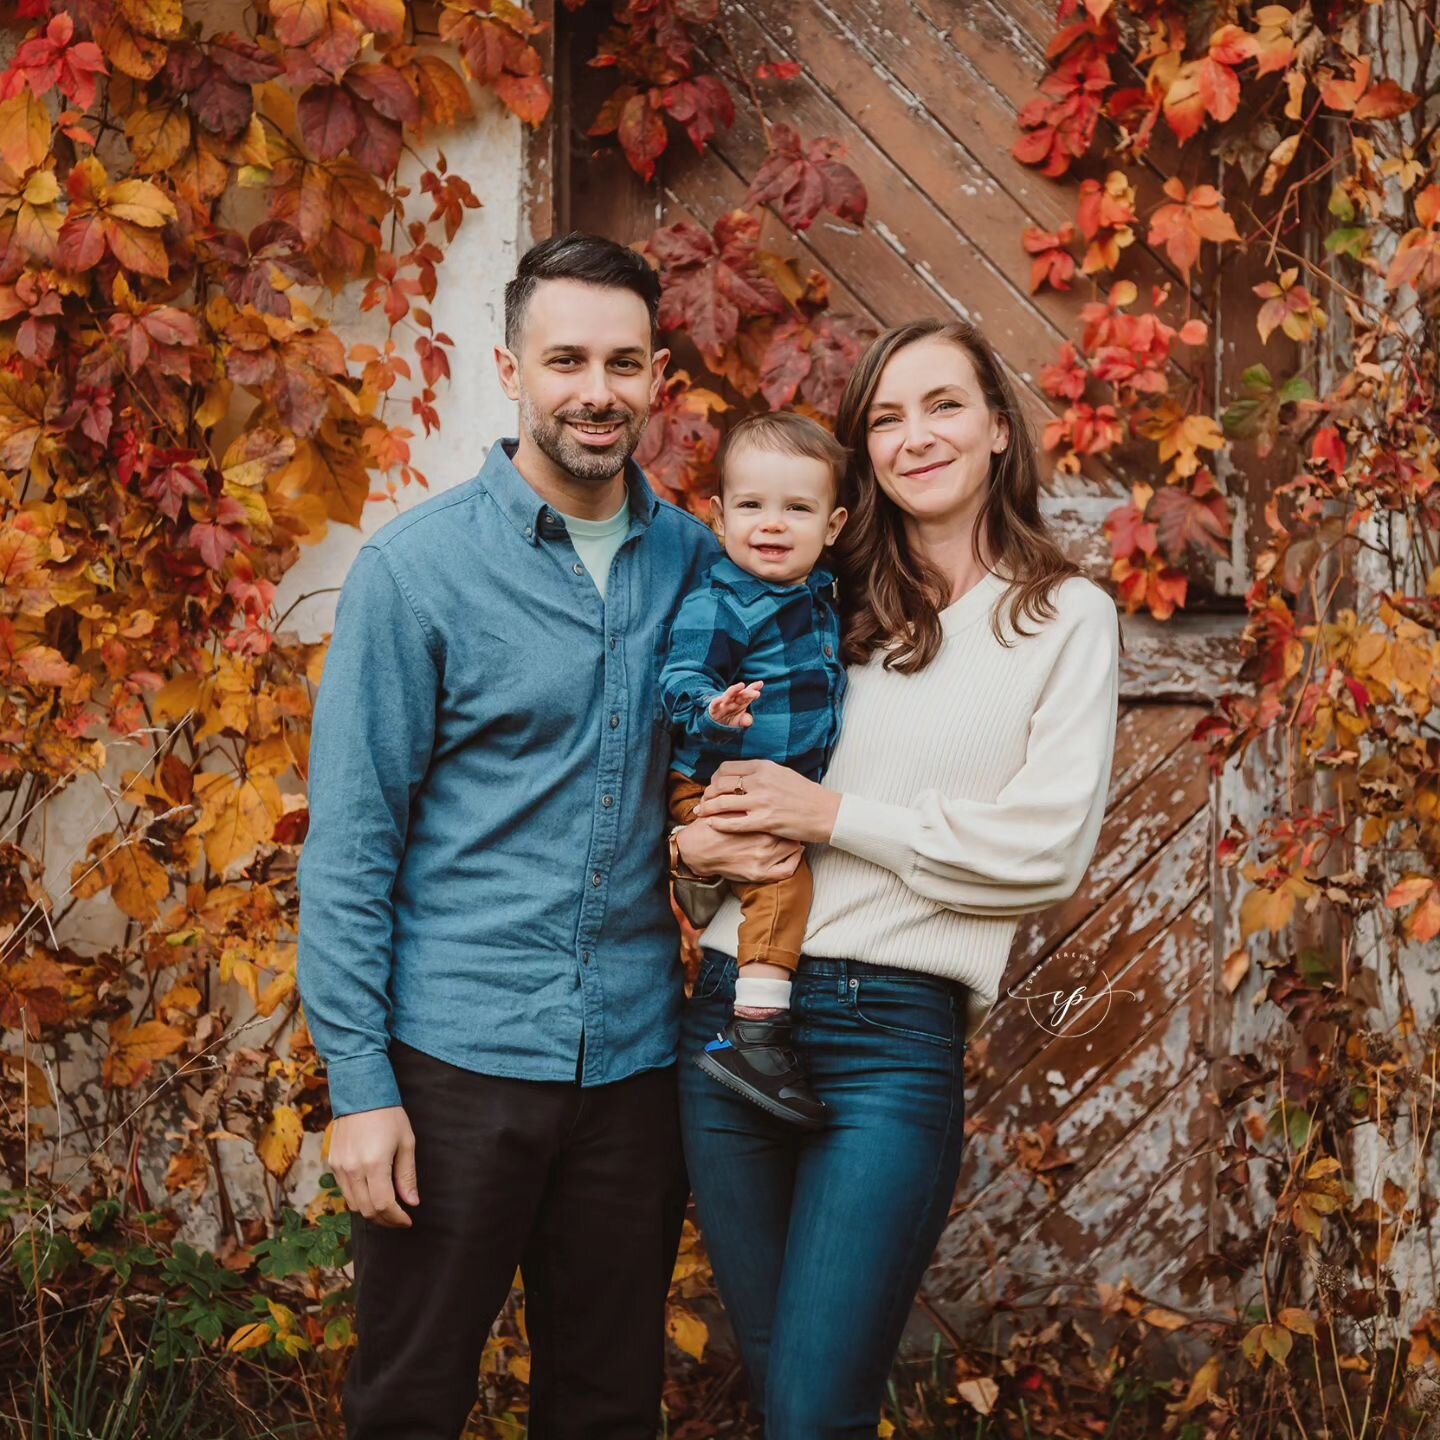 Sweater weather is slowly approaching, which means the leaves will be changing soon, and the Fall Mini session will be in full swing.

This beautiful family came out to Scotsdale Farm, one of my favourite locations. We definitely lucked out with the 